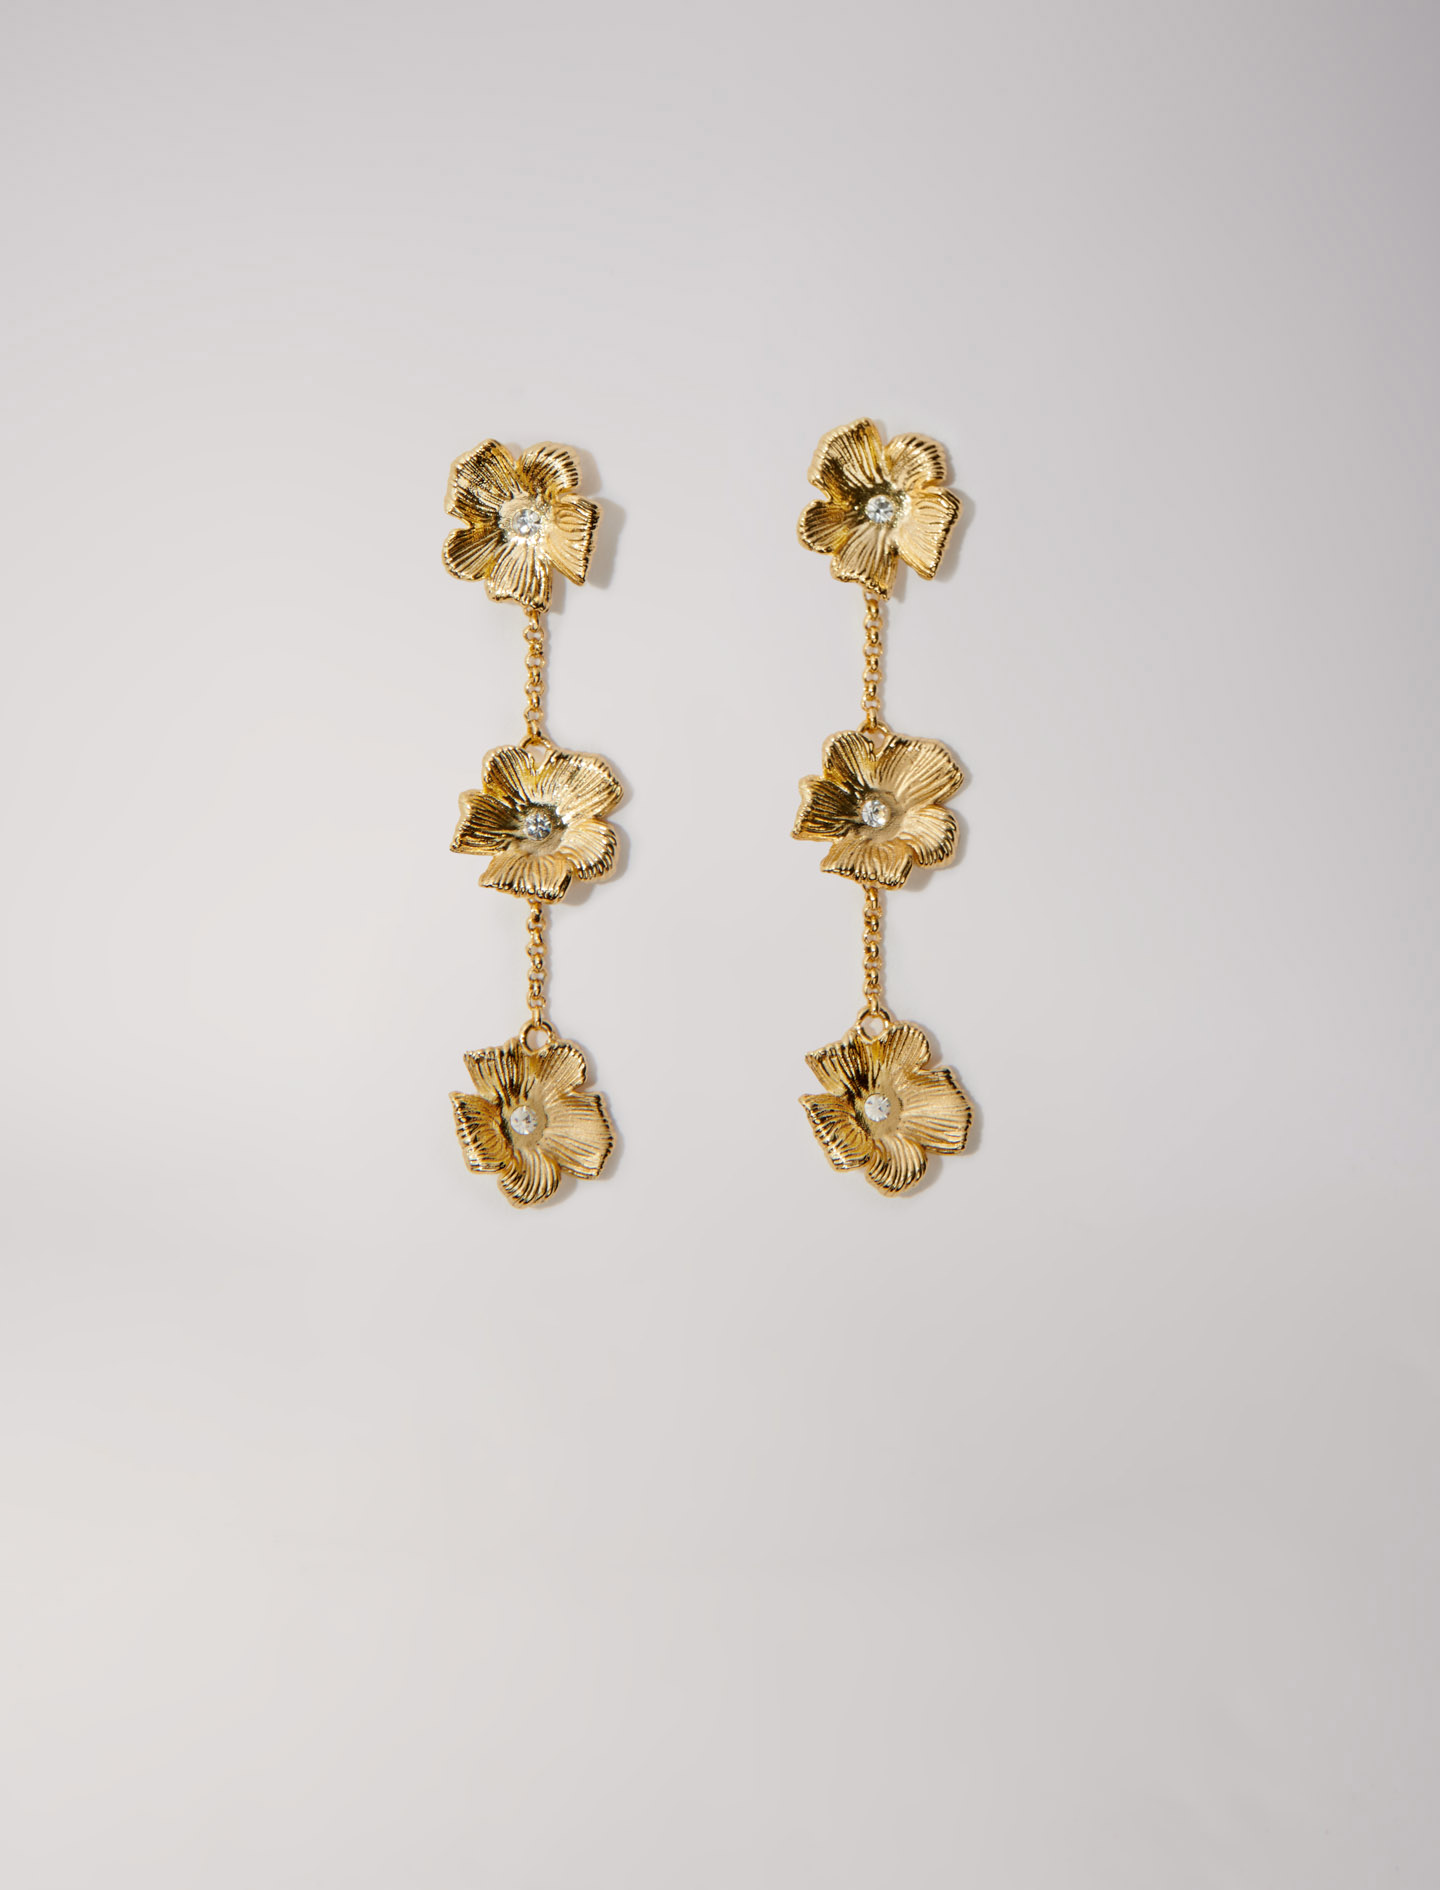 Woman's glass Jewellery: Flower earrings for Fall/Winter, size Woman-Jewelry-OS (ONE SIZE), in color Gold / Yellow